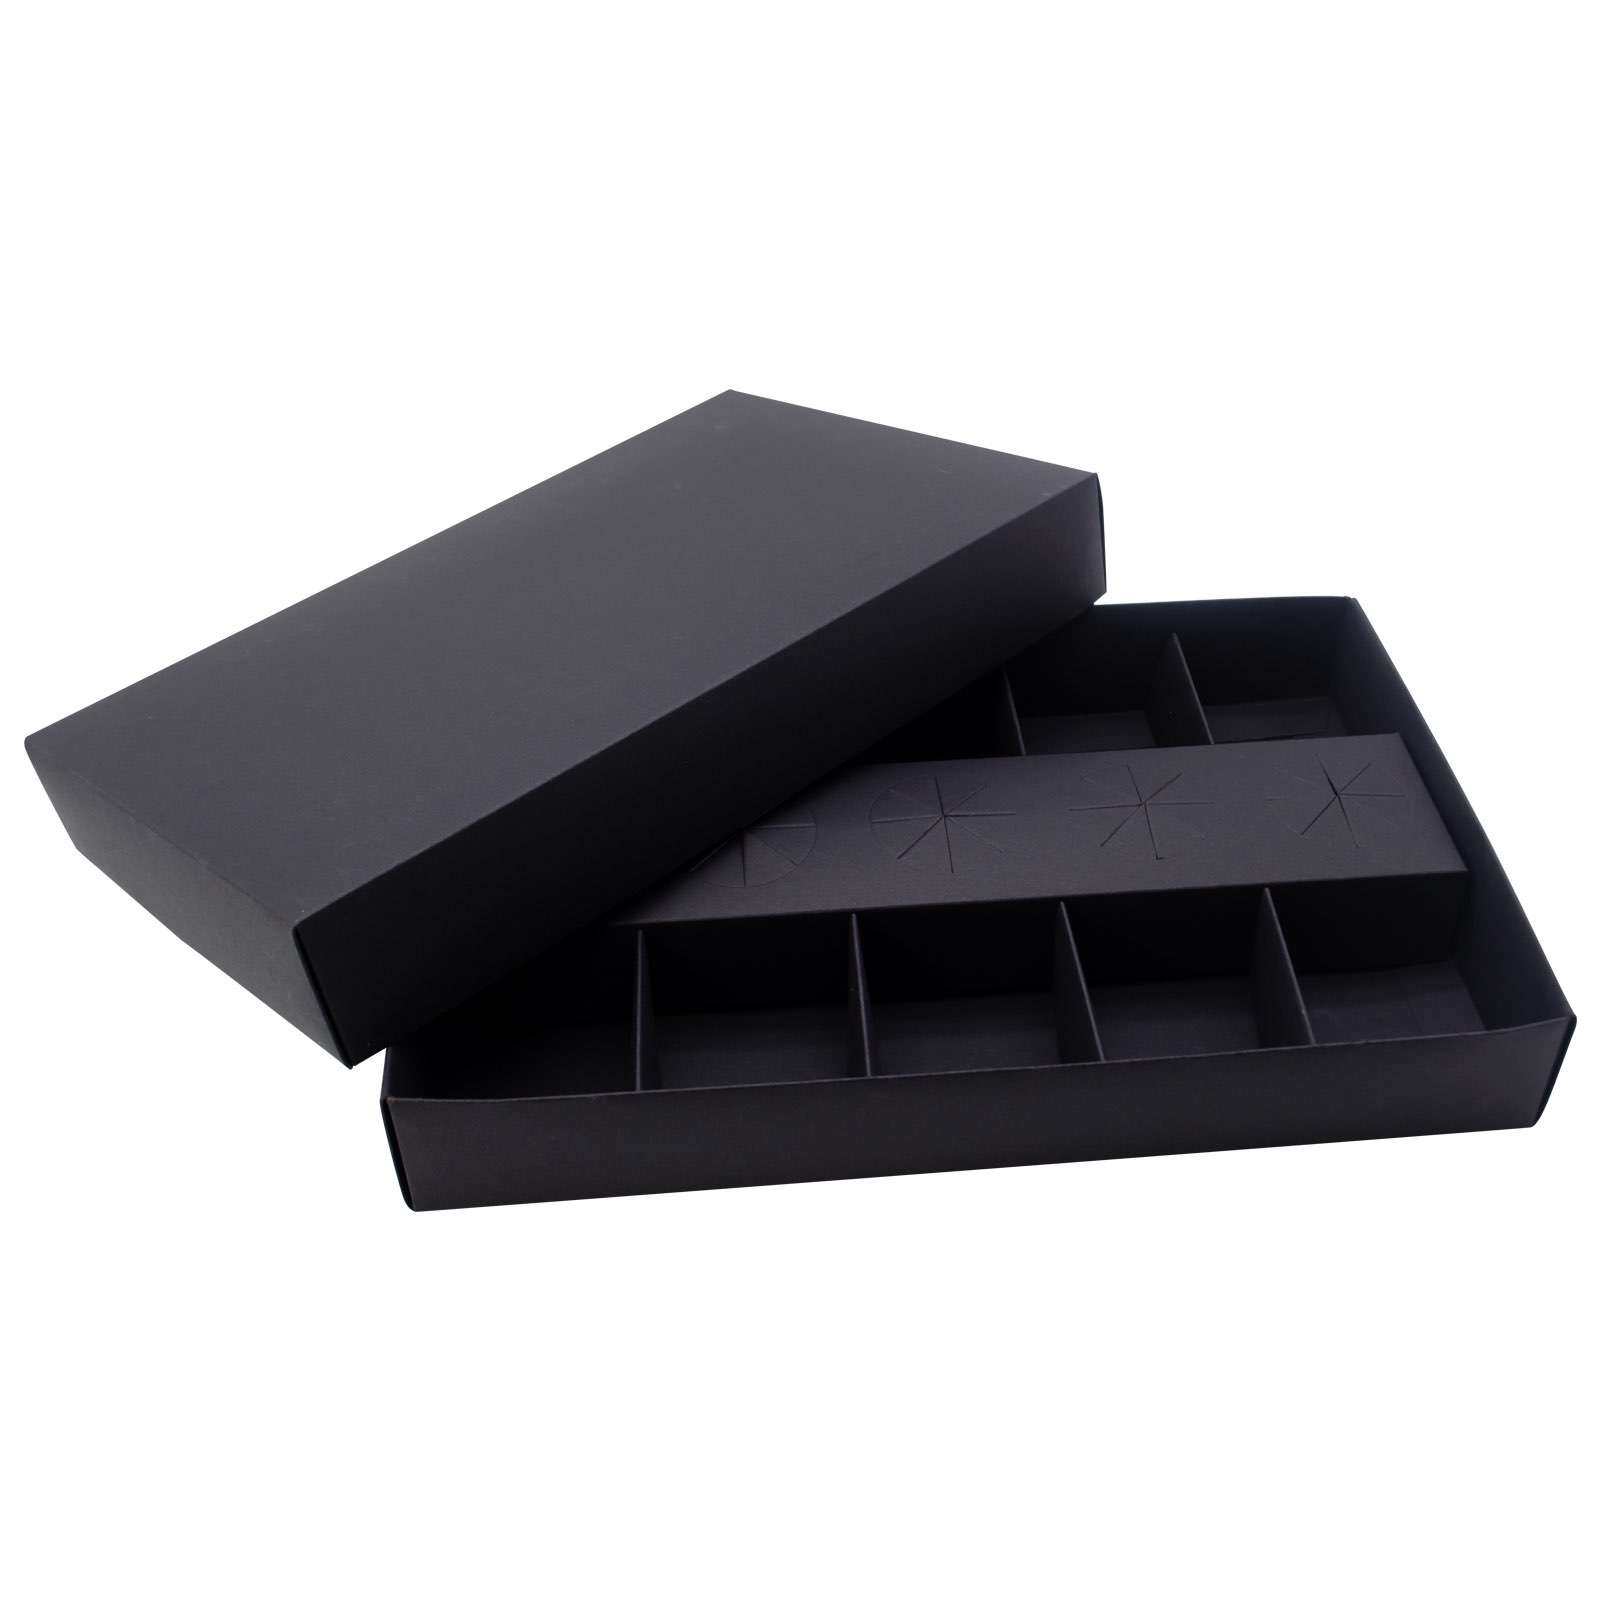 Wholesale black party box grazing box catering packaging platter box